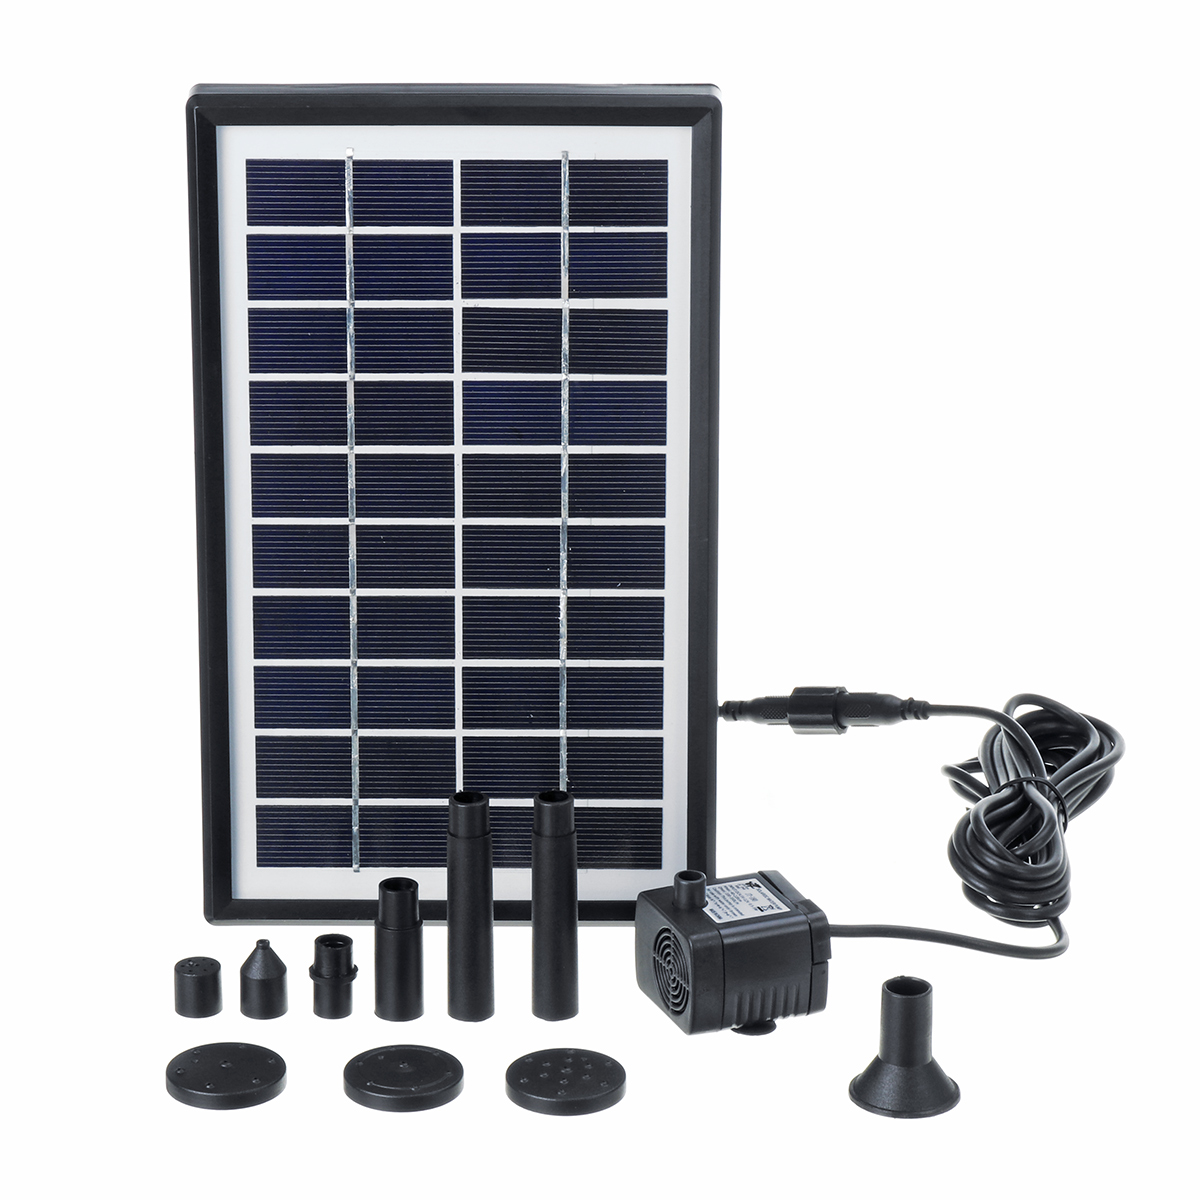 4W-10V-380LH-Solar-Panel-Water-Pump-Landscape-Pond-Pool-Aquarium-Floating-Fountain-with-6-Nozzles-1543610-5